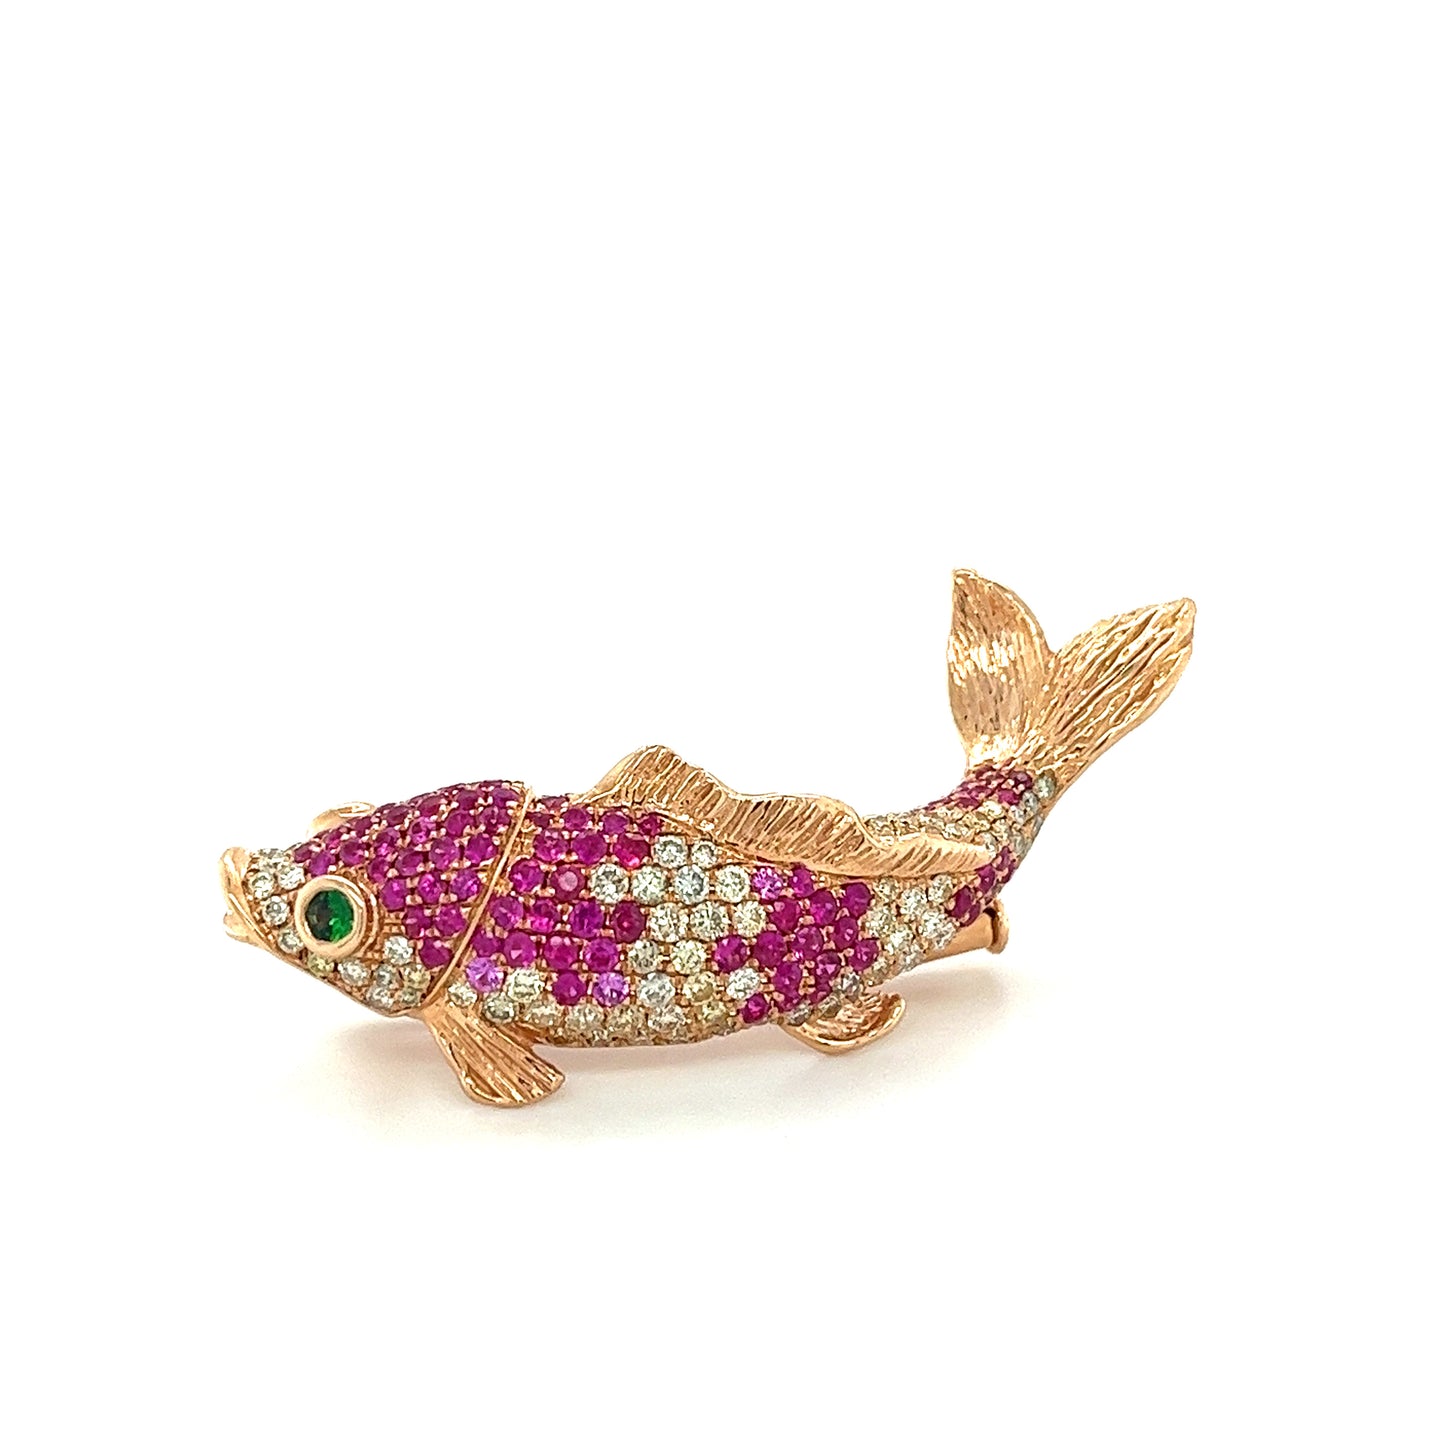 18K Gold Fish Brooch with Diamonds Pink Sapphires and Rubies